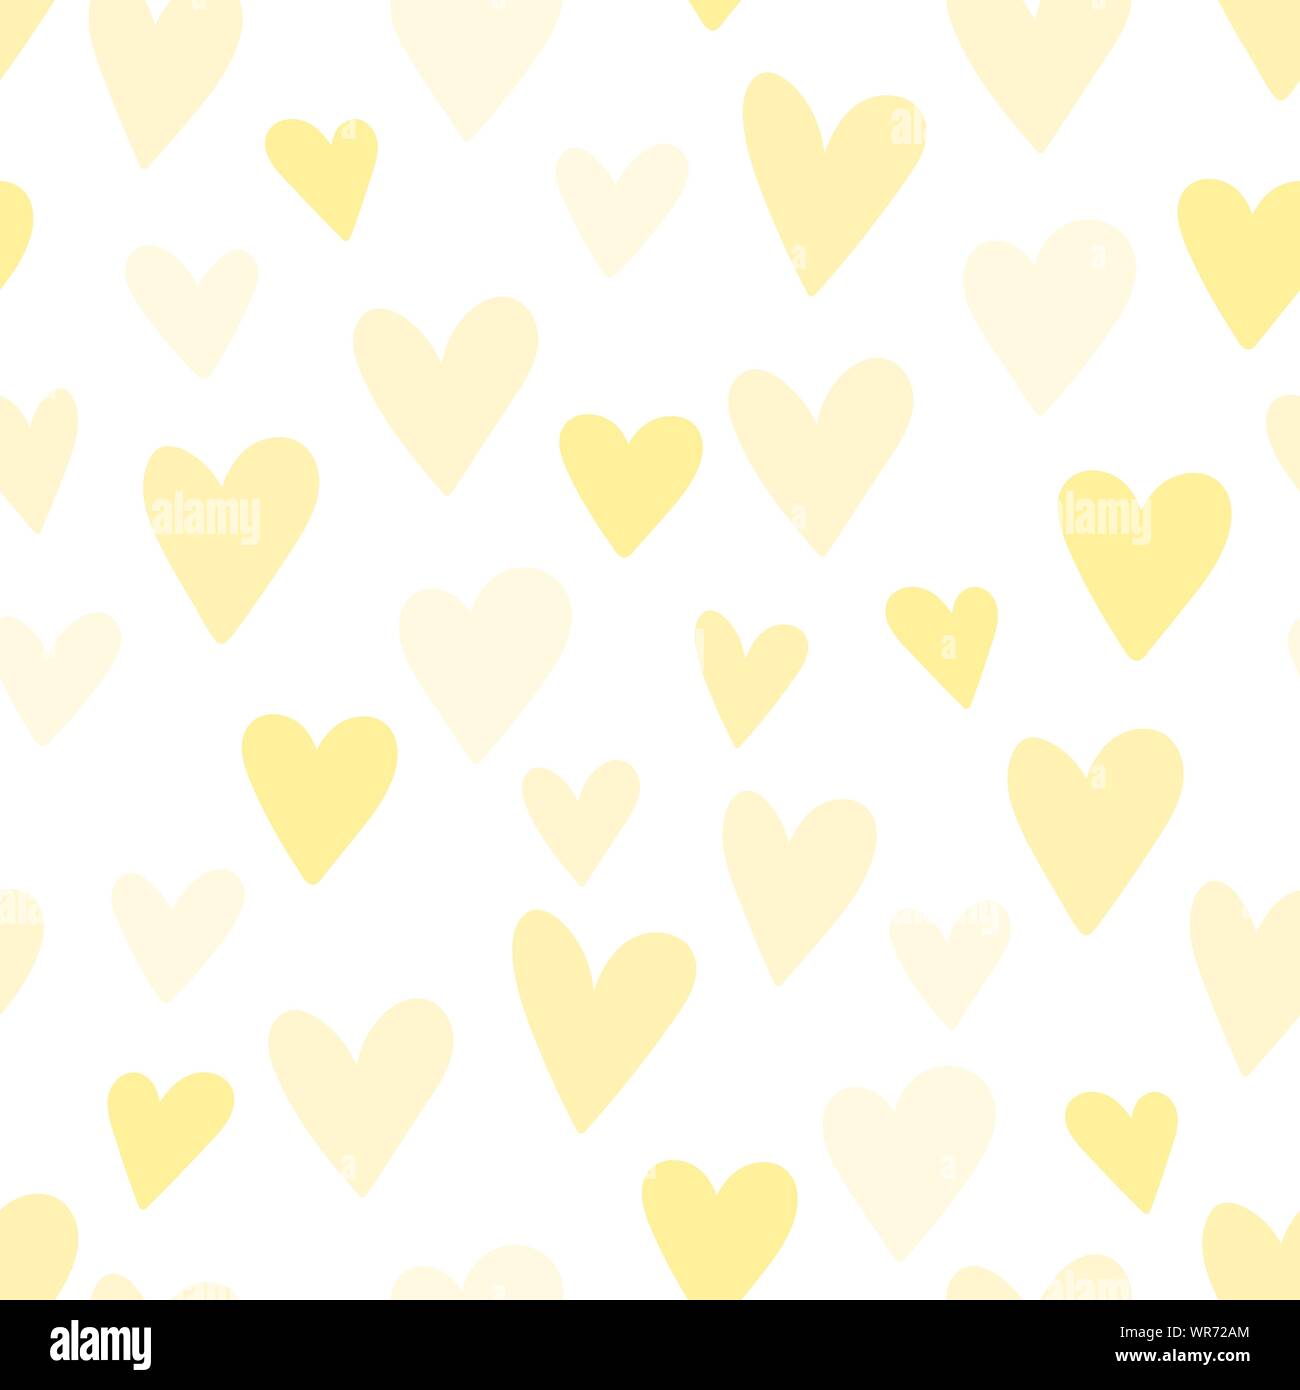 Seamless pattern of yellow hearts. Concept for baby shower, birthday, love, valentines day, texture, background, wallpaper, wrapping paper, print for Stock Vector